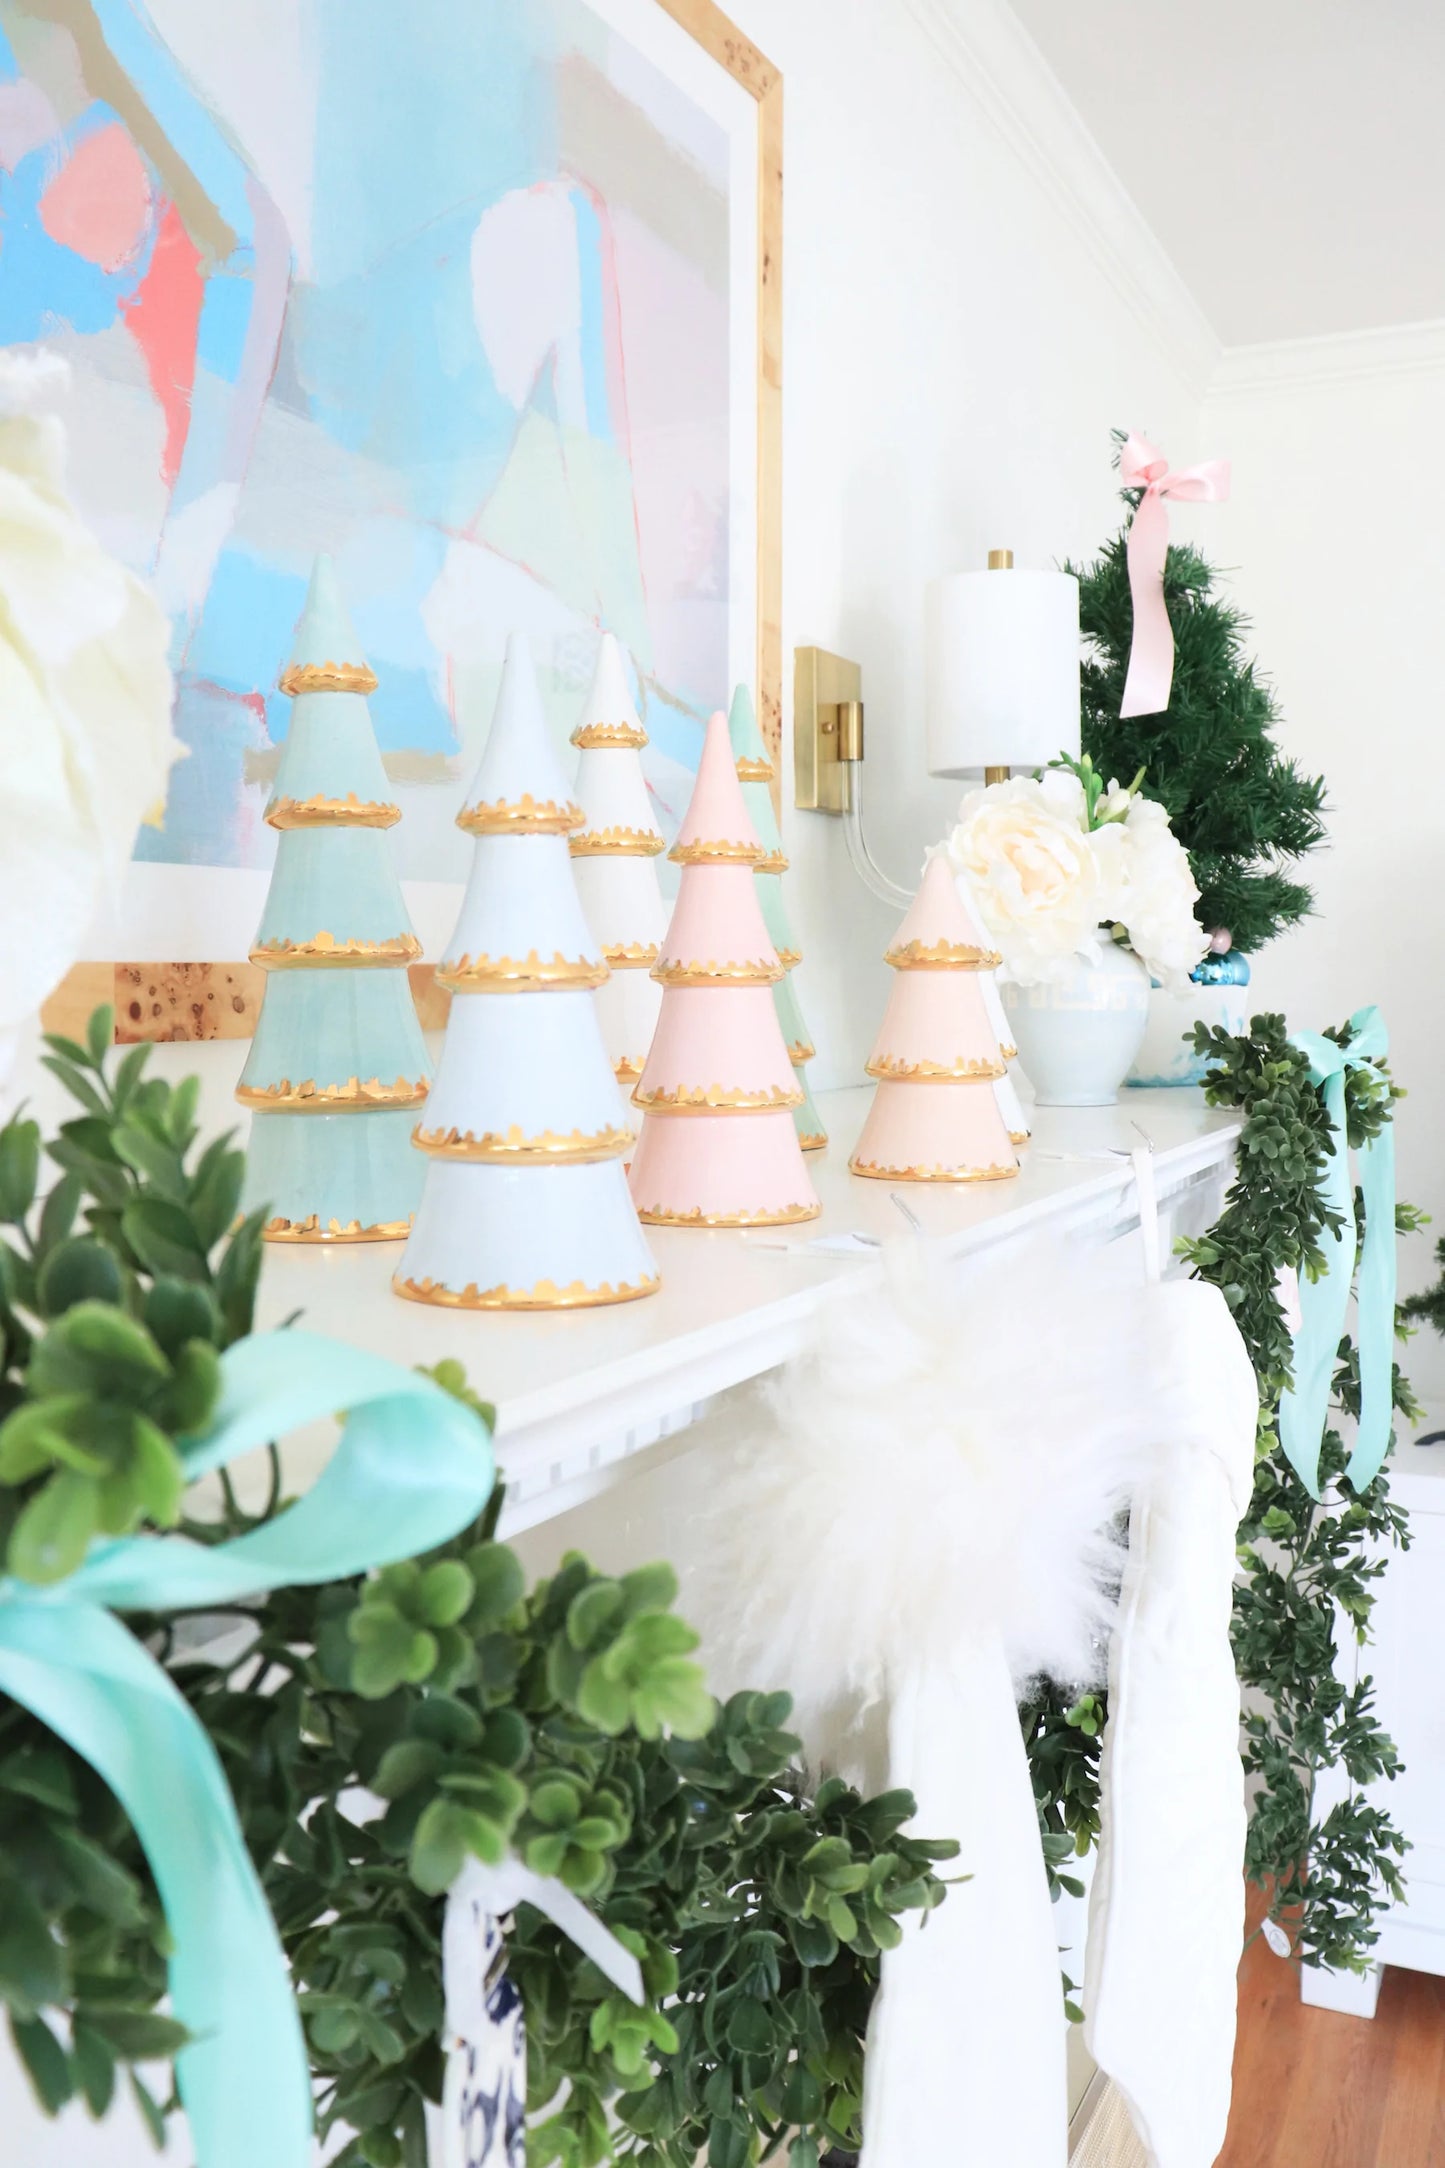 Sea Glass Christmas Trees with 22K Gold Brushstroke Accent